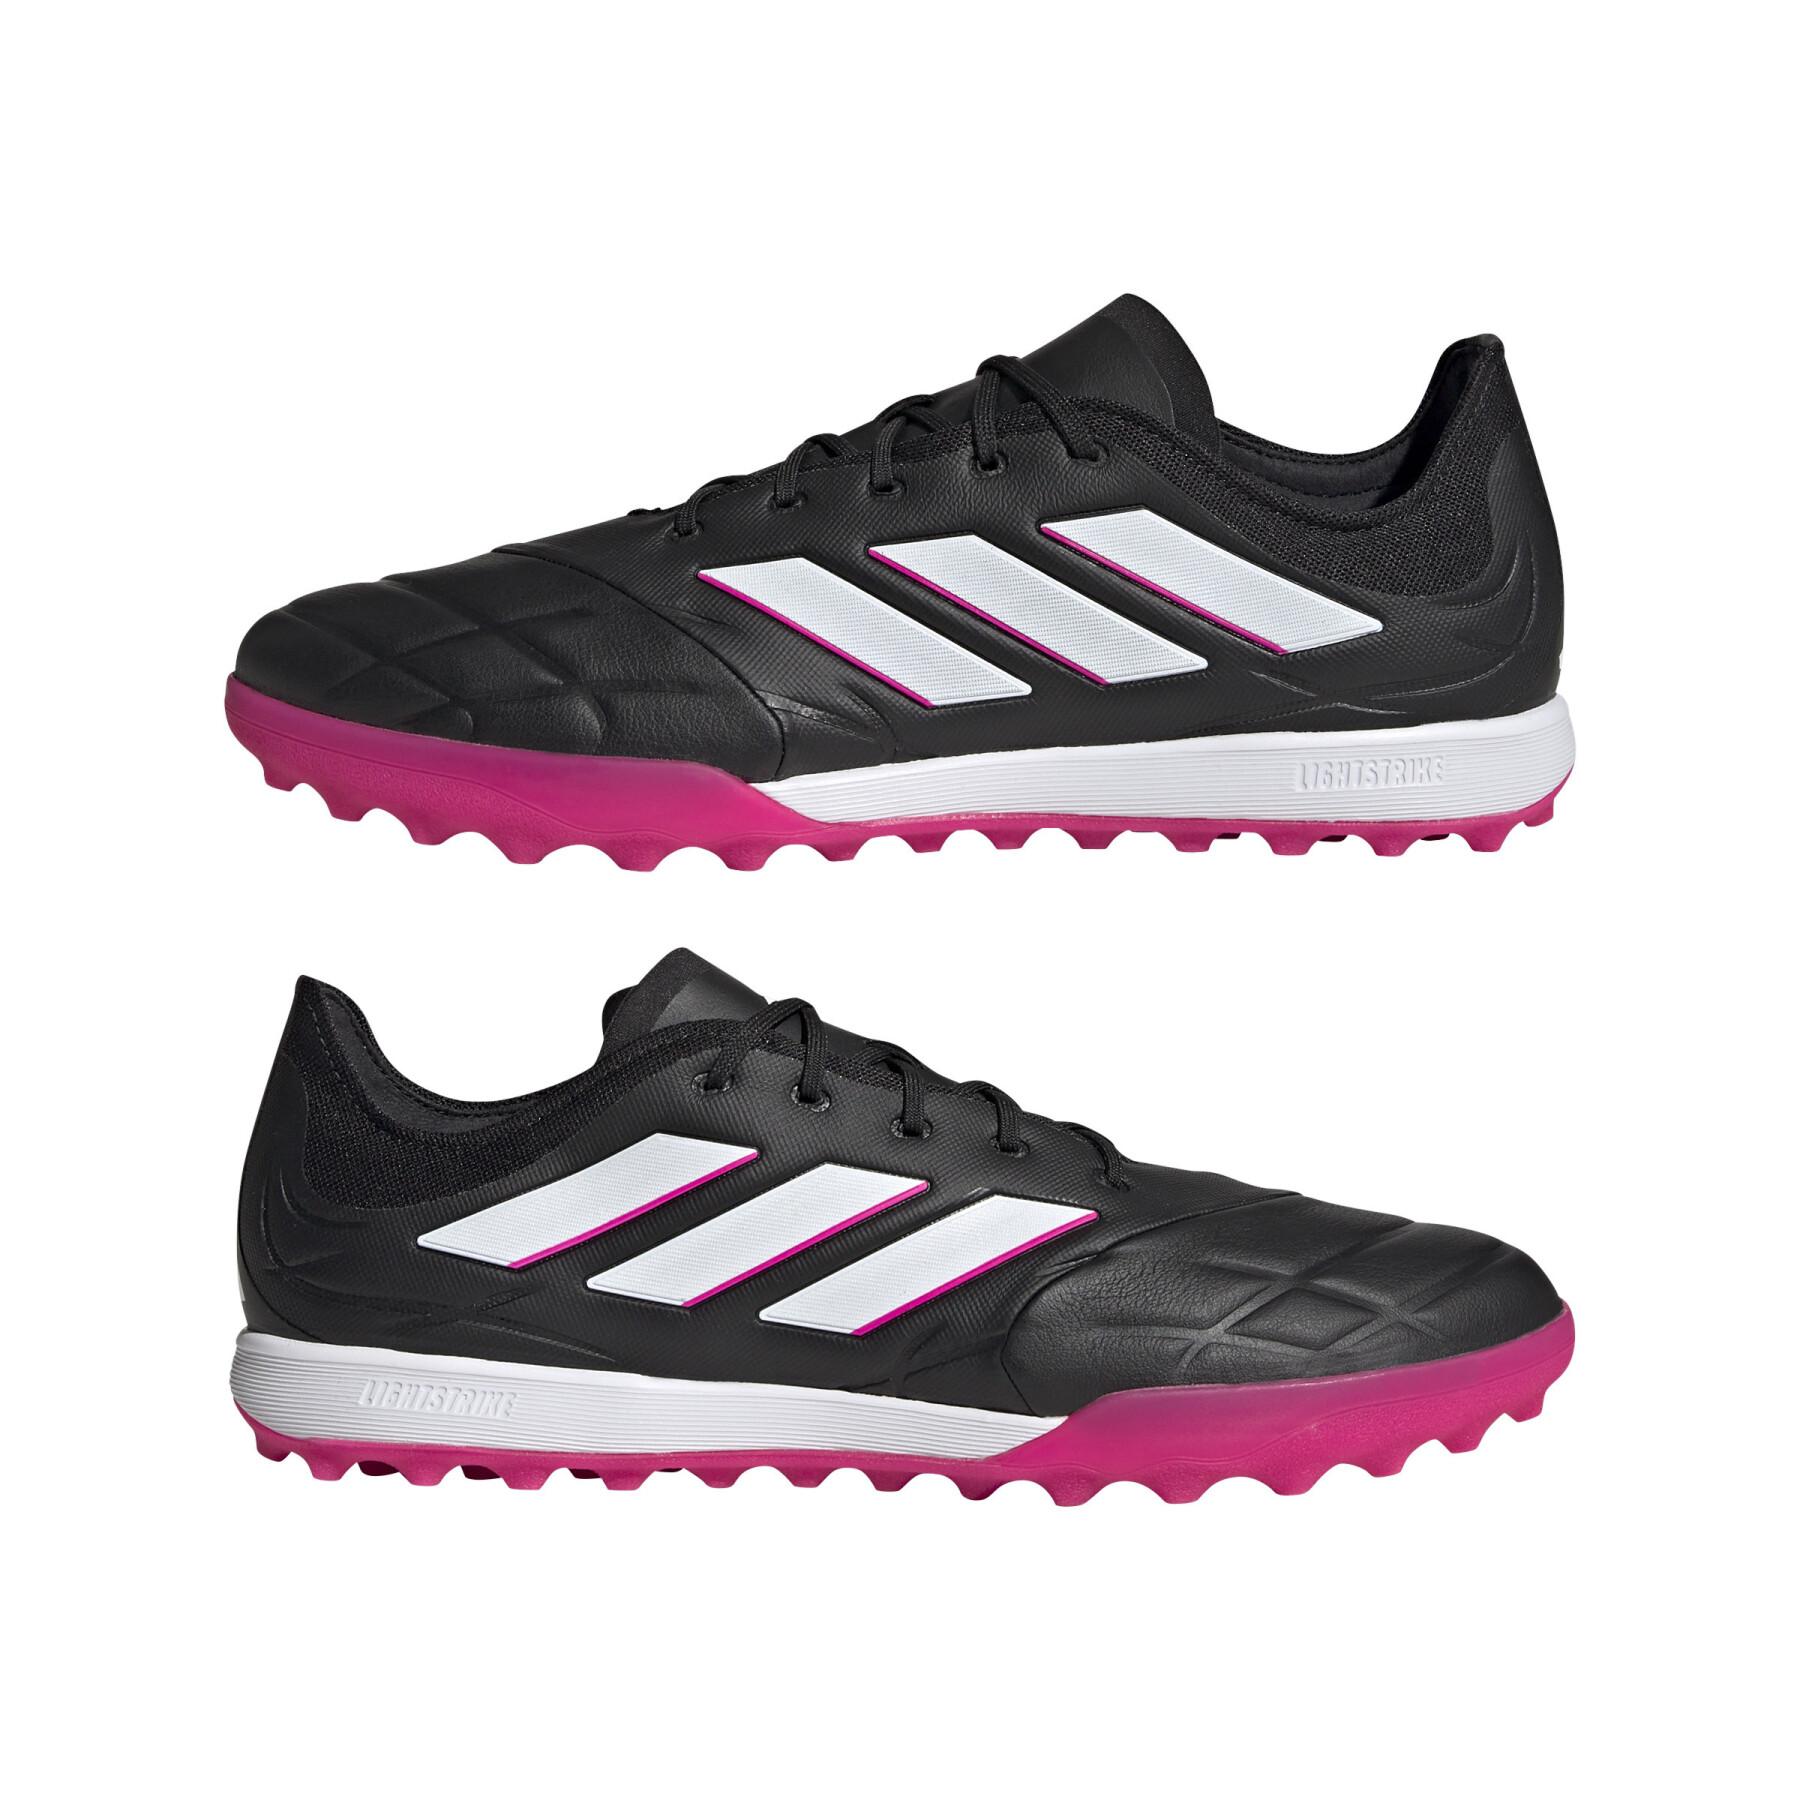 Soccer shoes adidas Copa Pure.1 Turf